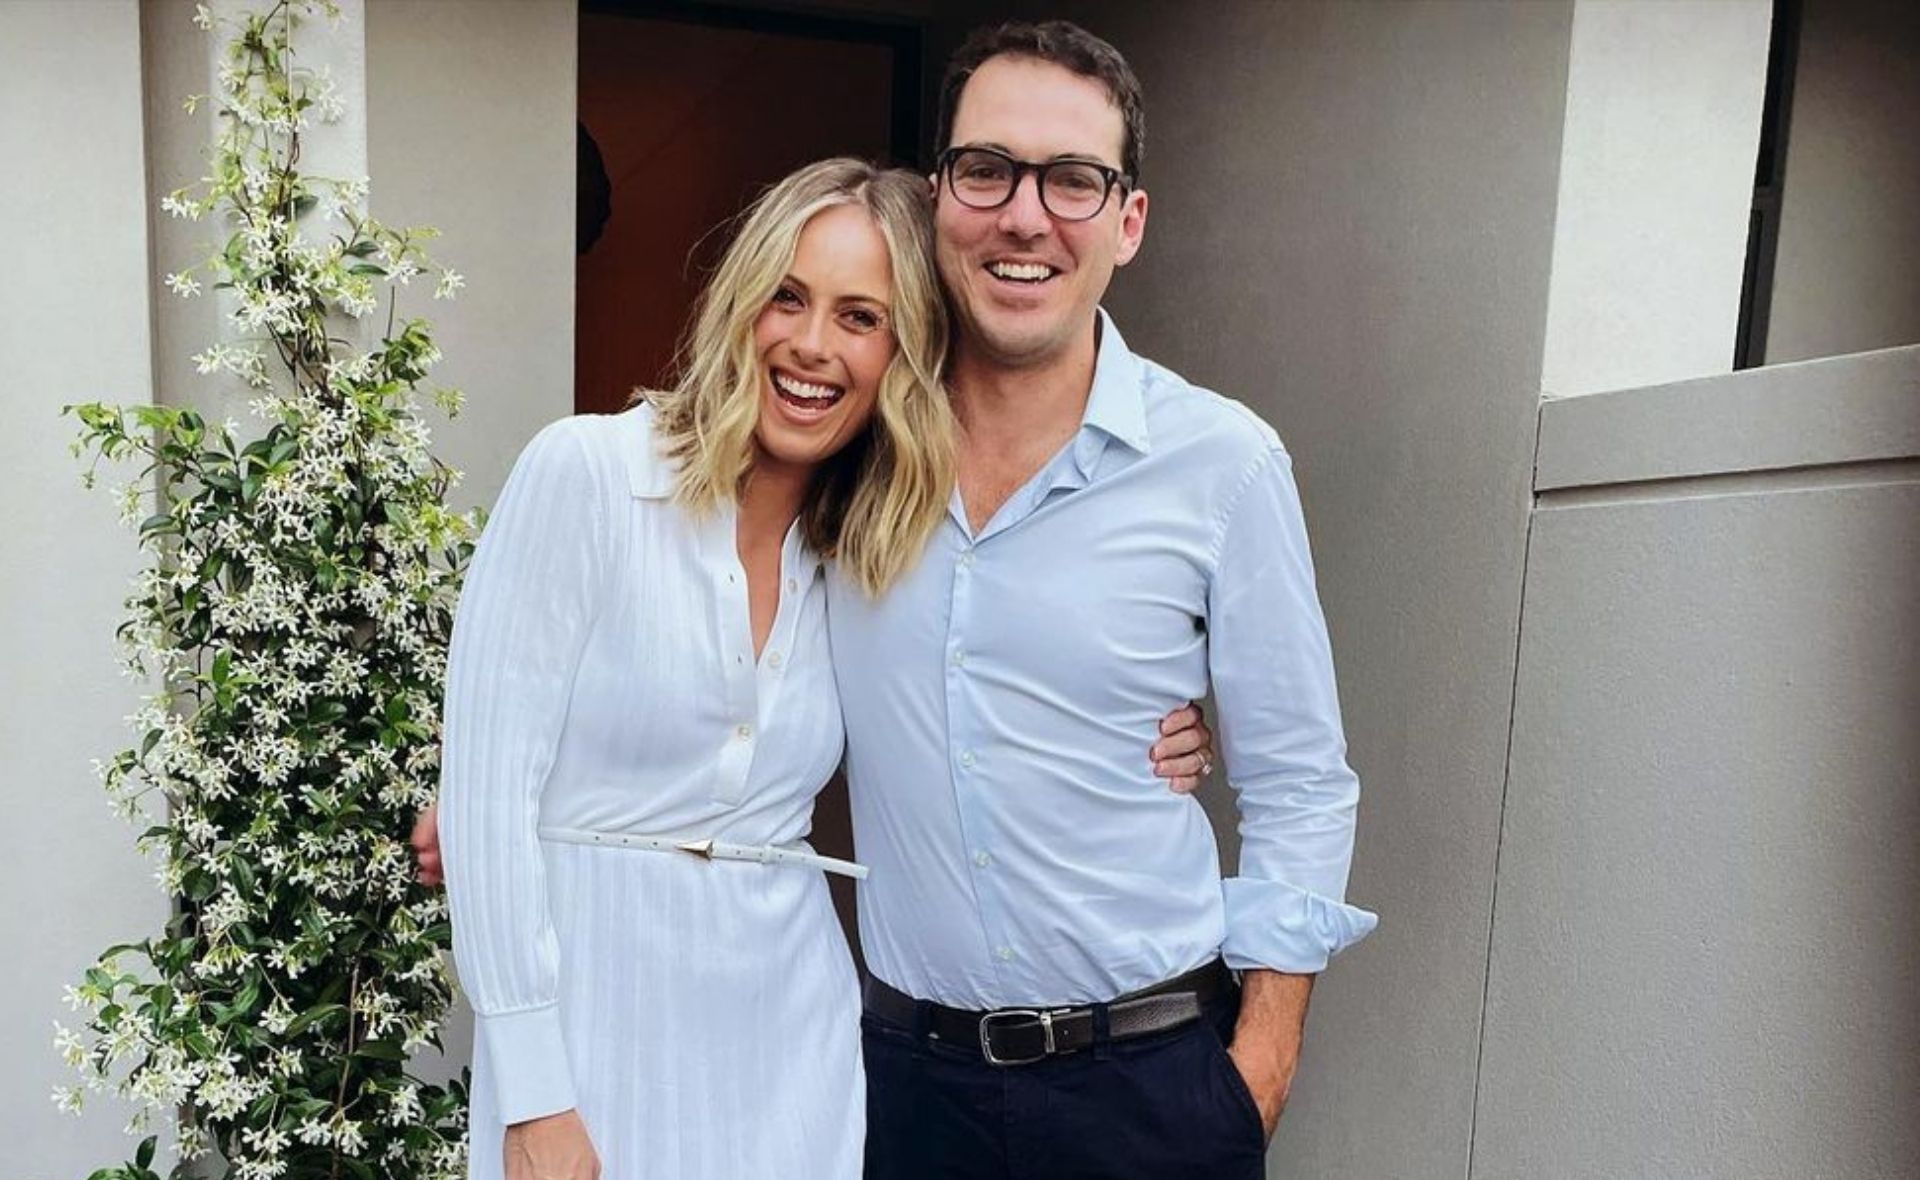 Peter Stefanovic gushes over his glammed up wife Sylvia Jeffreys, and it’s what we’re all thinking